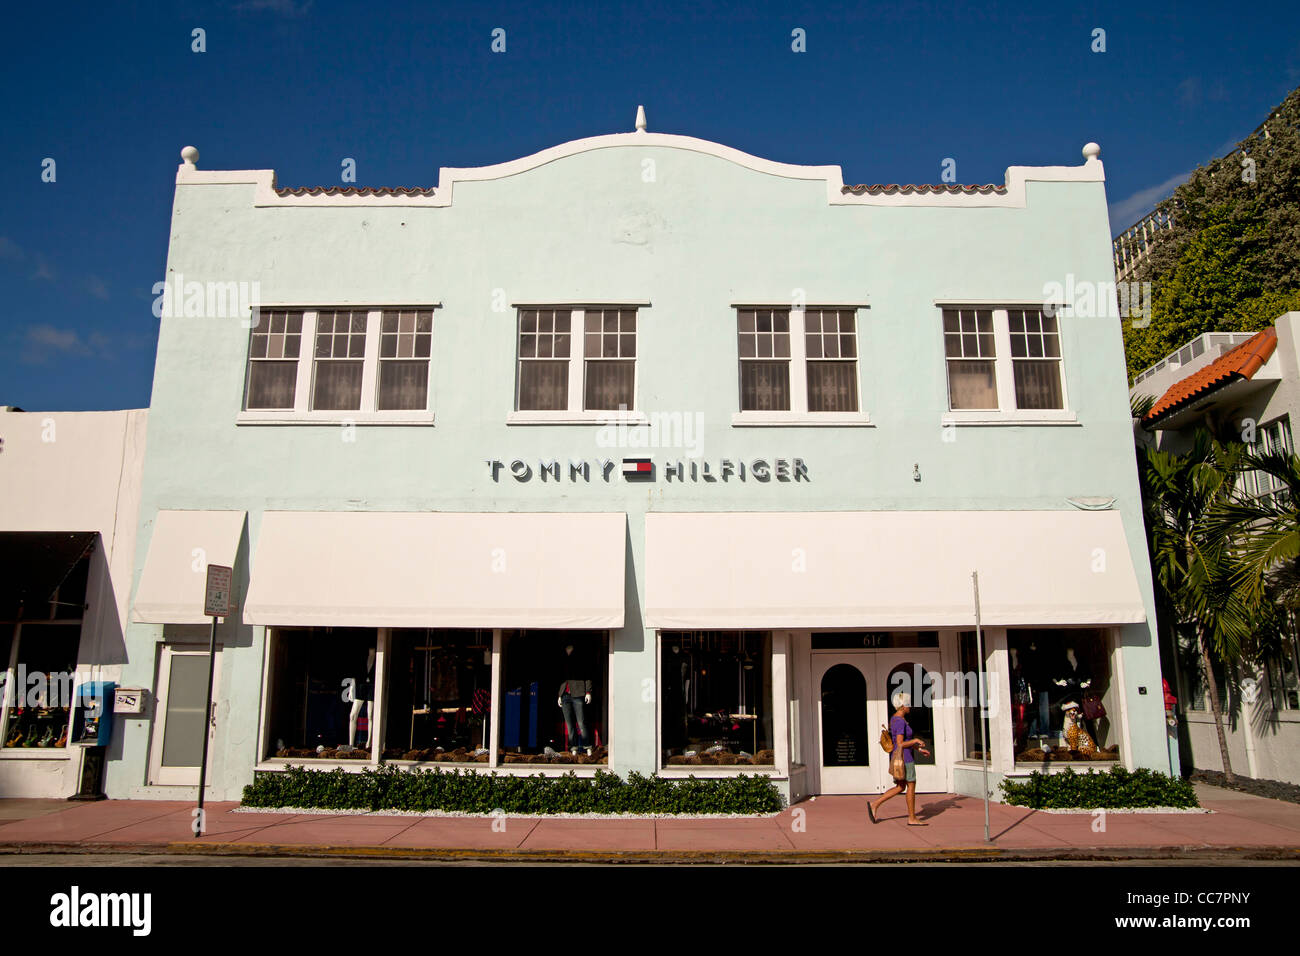 Tommy Hilfiger Store in South Beach, Miami, Florida, USA Stockfoto